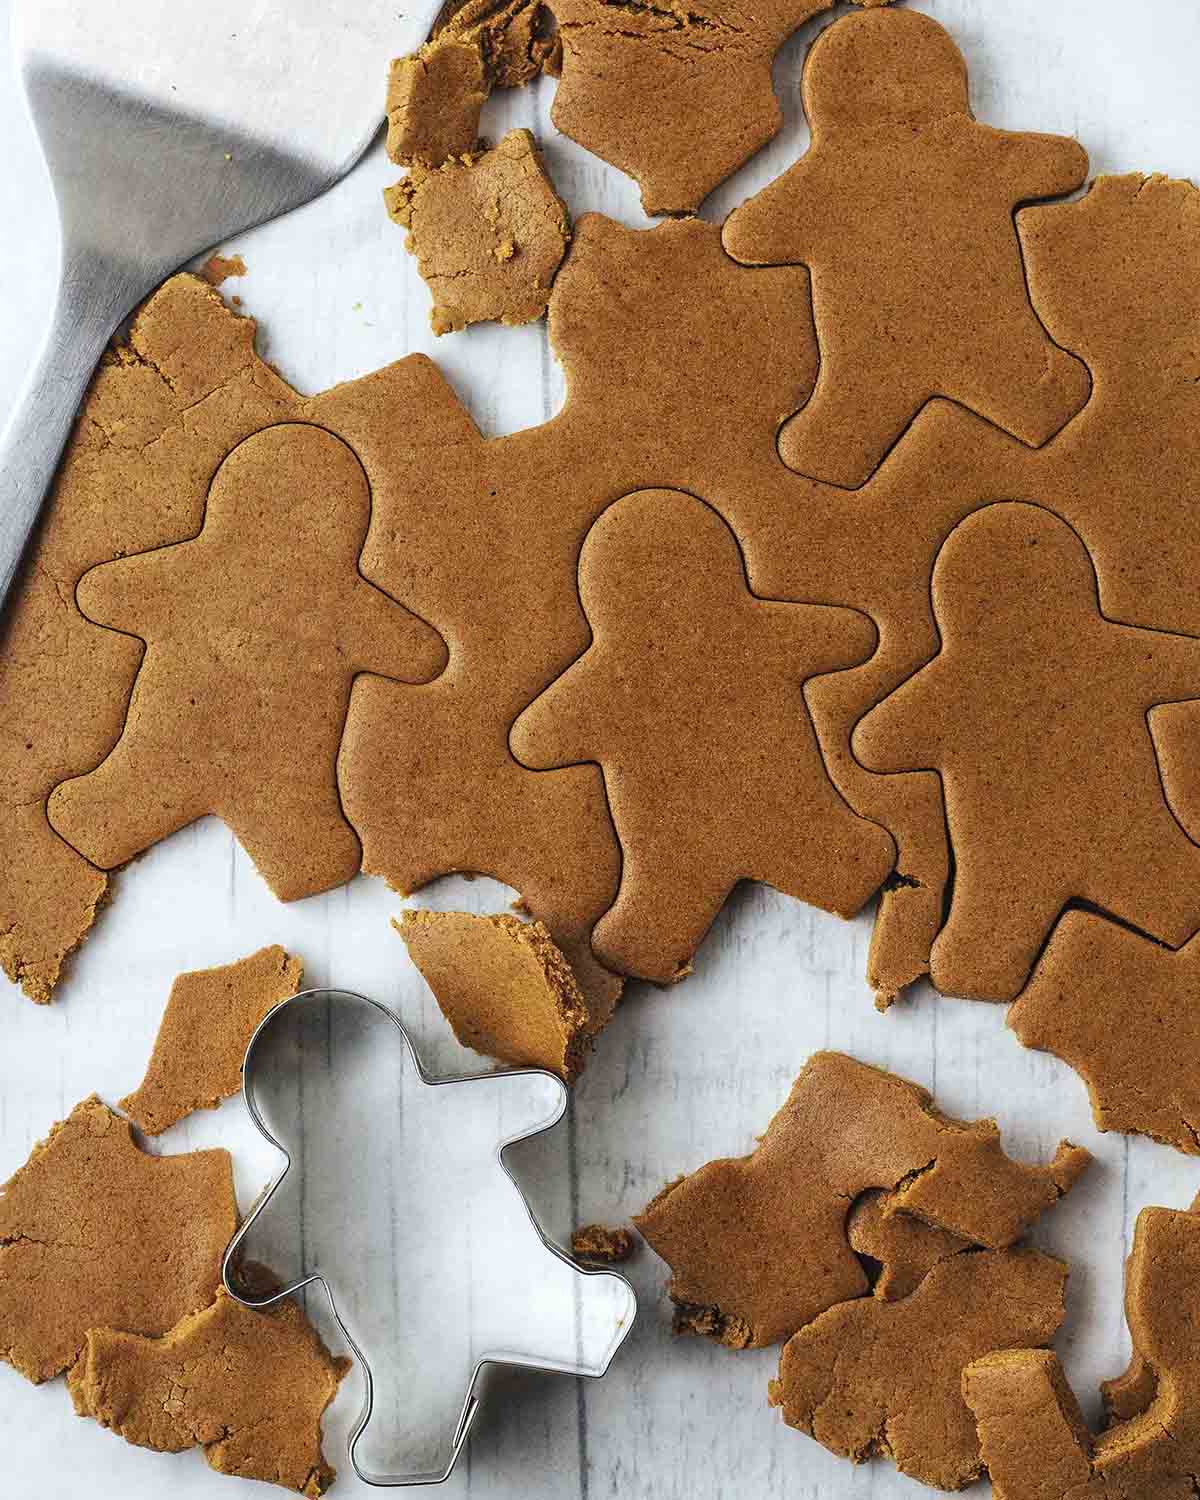 Rolled out gingerbread cookie dough on parchment paper with gingerbread people shapes cut out of the dough.